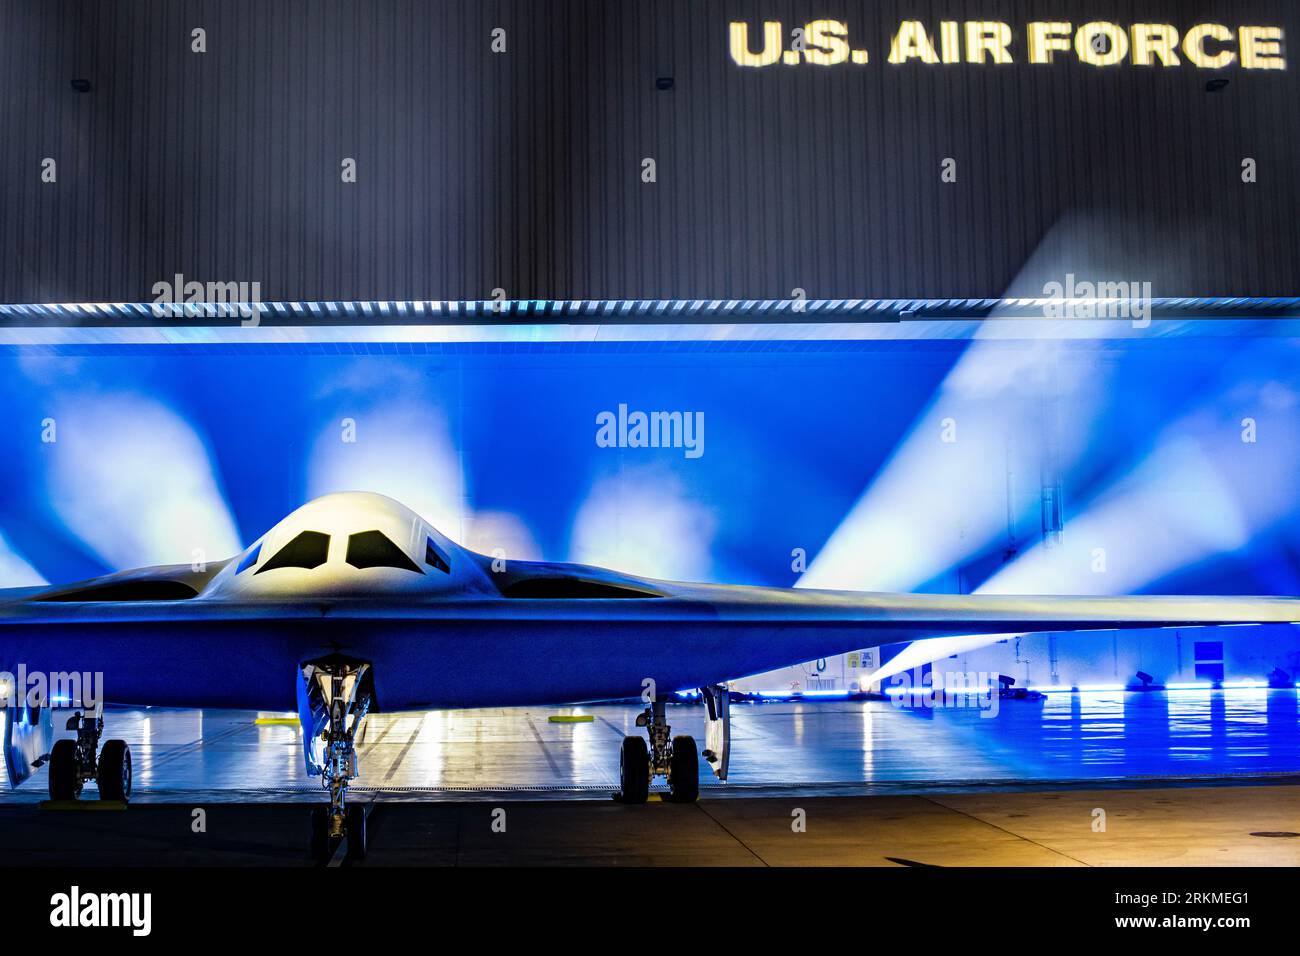 Palmdale, United States. 02 December, 2022. The U.S. Air Force B-21 Raider stealth strategic bomber aircraft unveiled during a ceremony at Plant 42 at Edwards Air Force Base, December 2, 2022 in Palmdale, California.  Credit: A1C Joshua Carroll/U.S. Air Force Photo/Alamy Live News Stock Photo